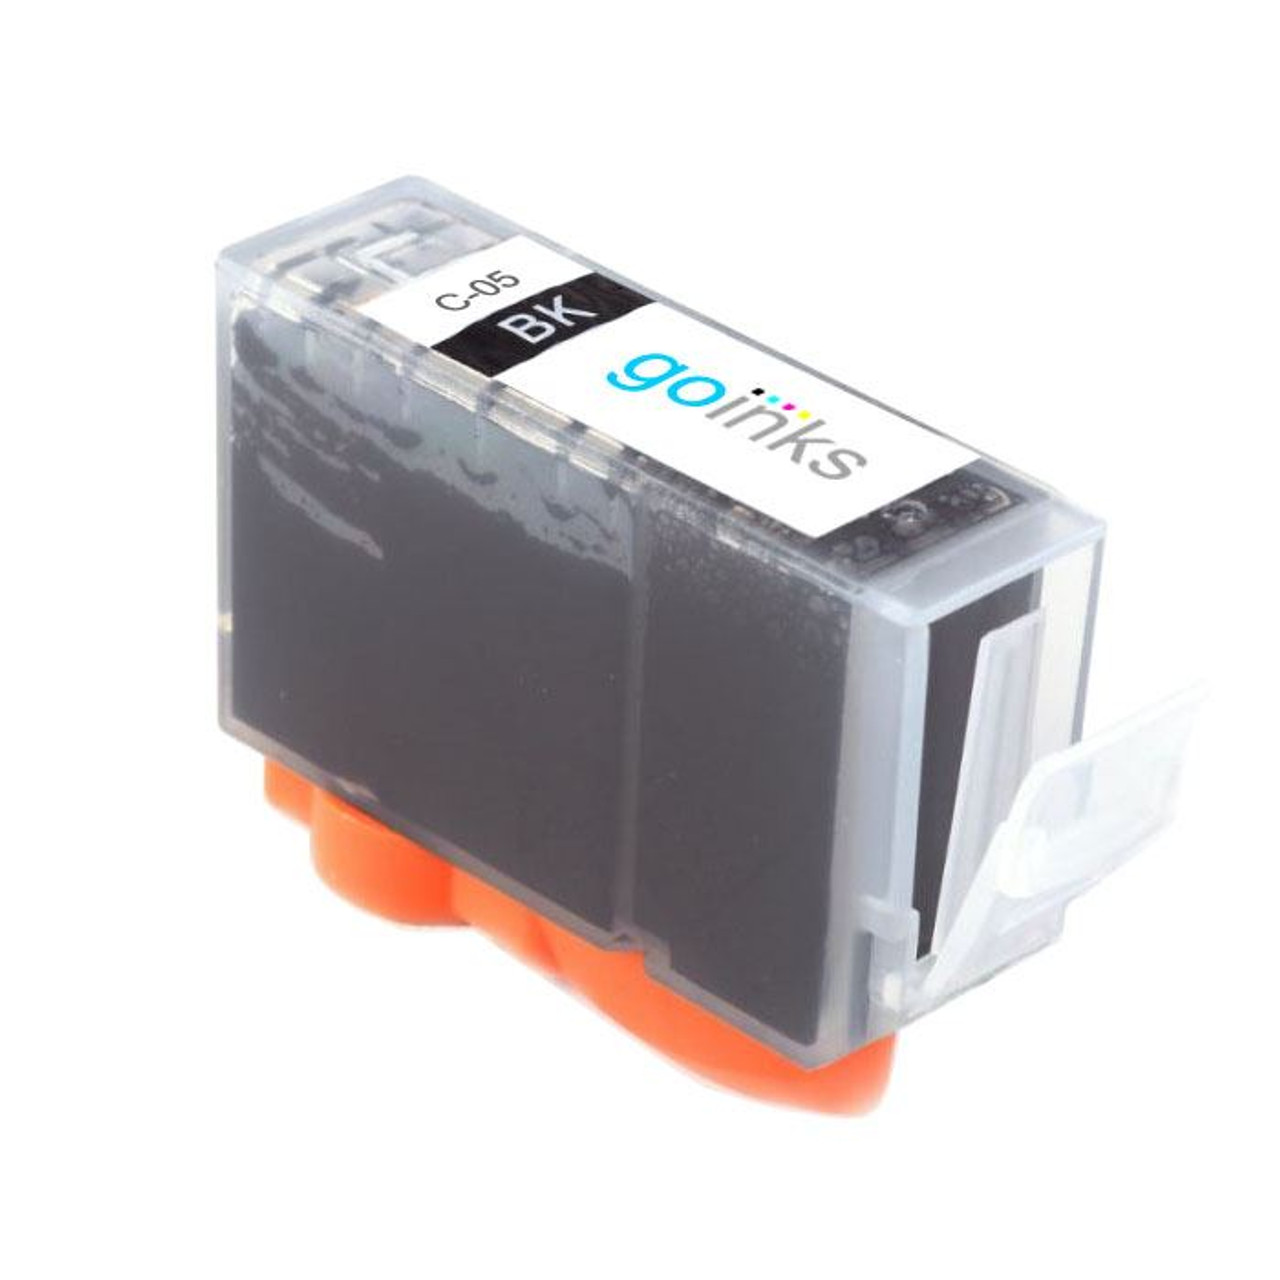 Compatible PGI-5 Black Ink Cartridge from Inks (1 Ink)